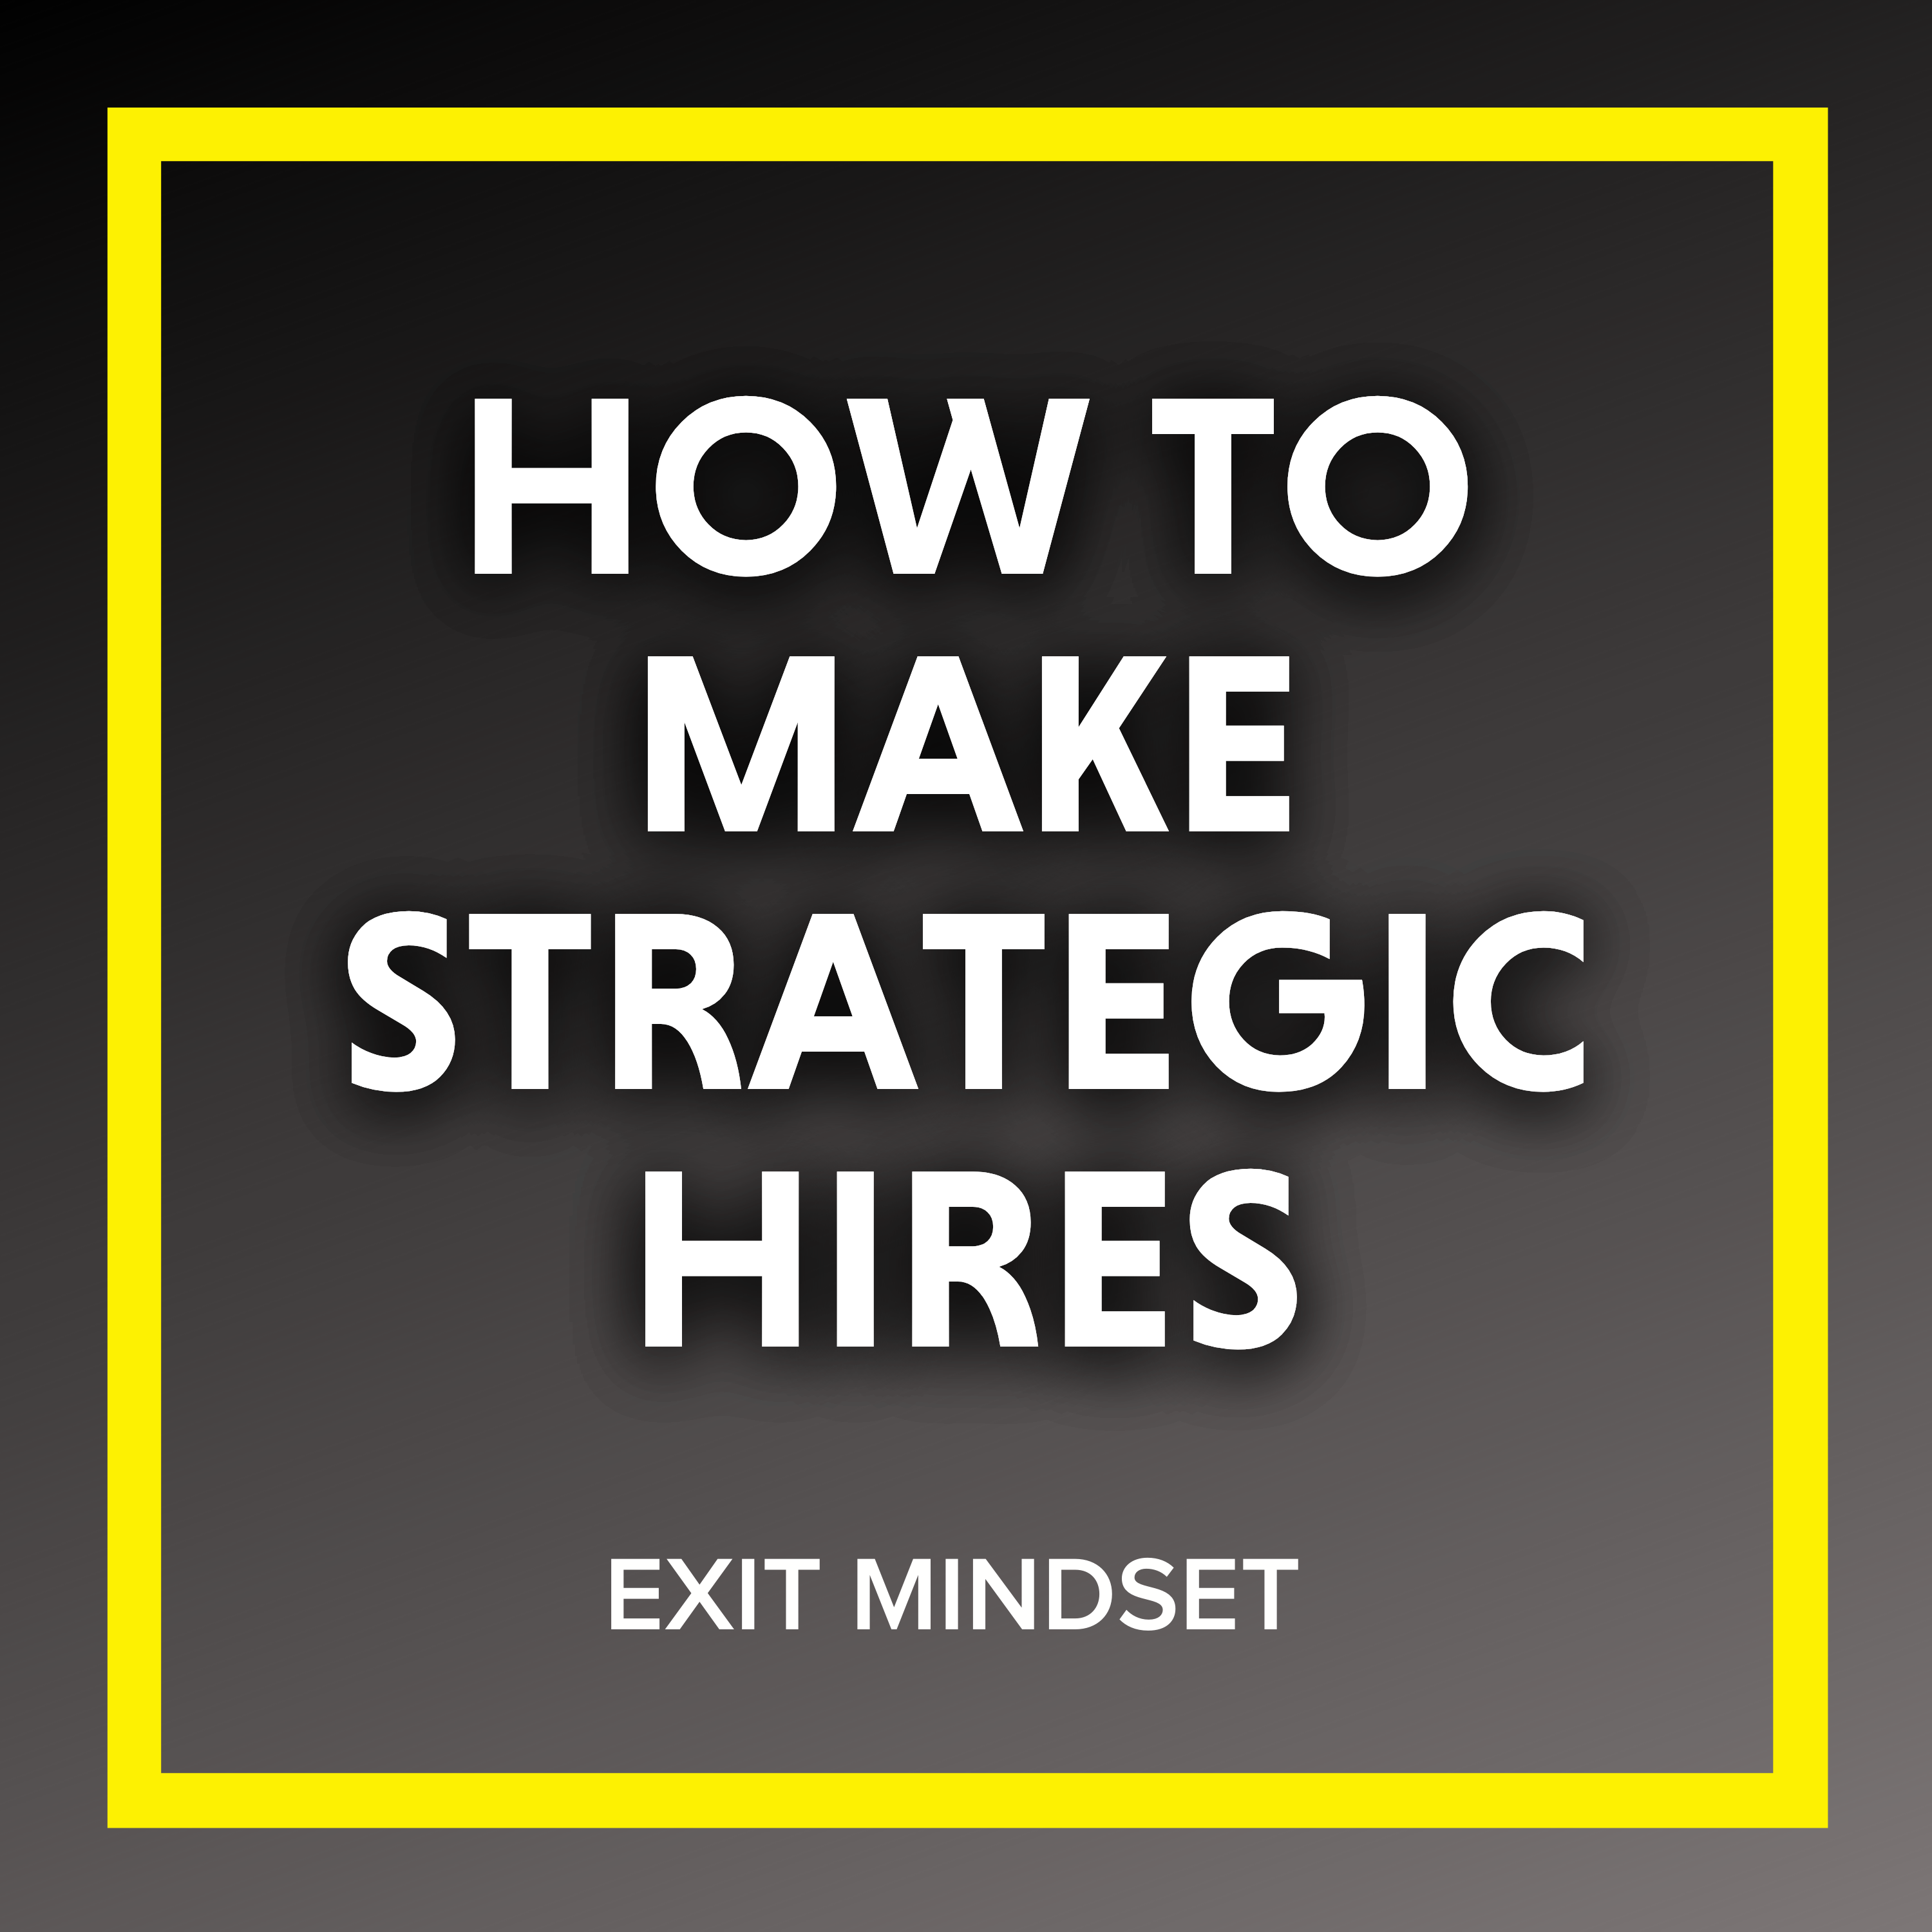 How to Make Strategic Hires